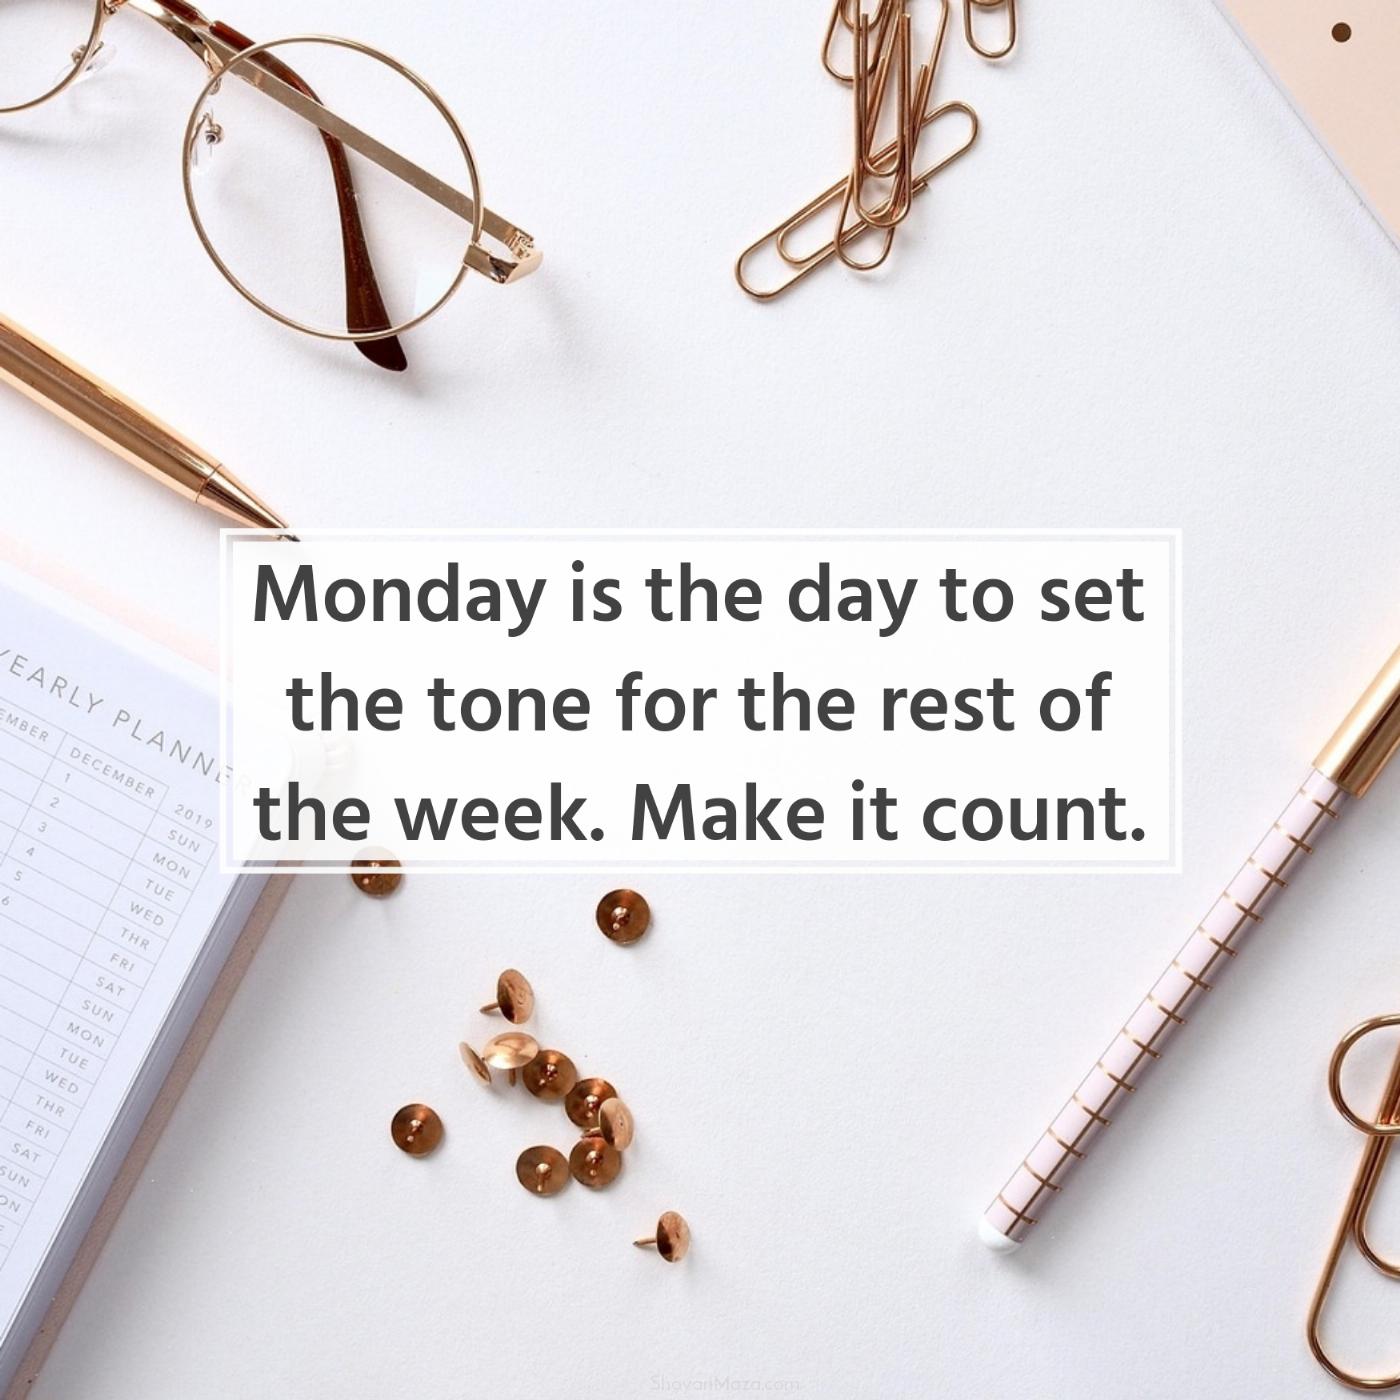 Monday is the day to set the tone for the rest of the week